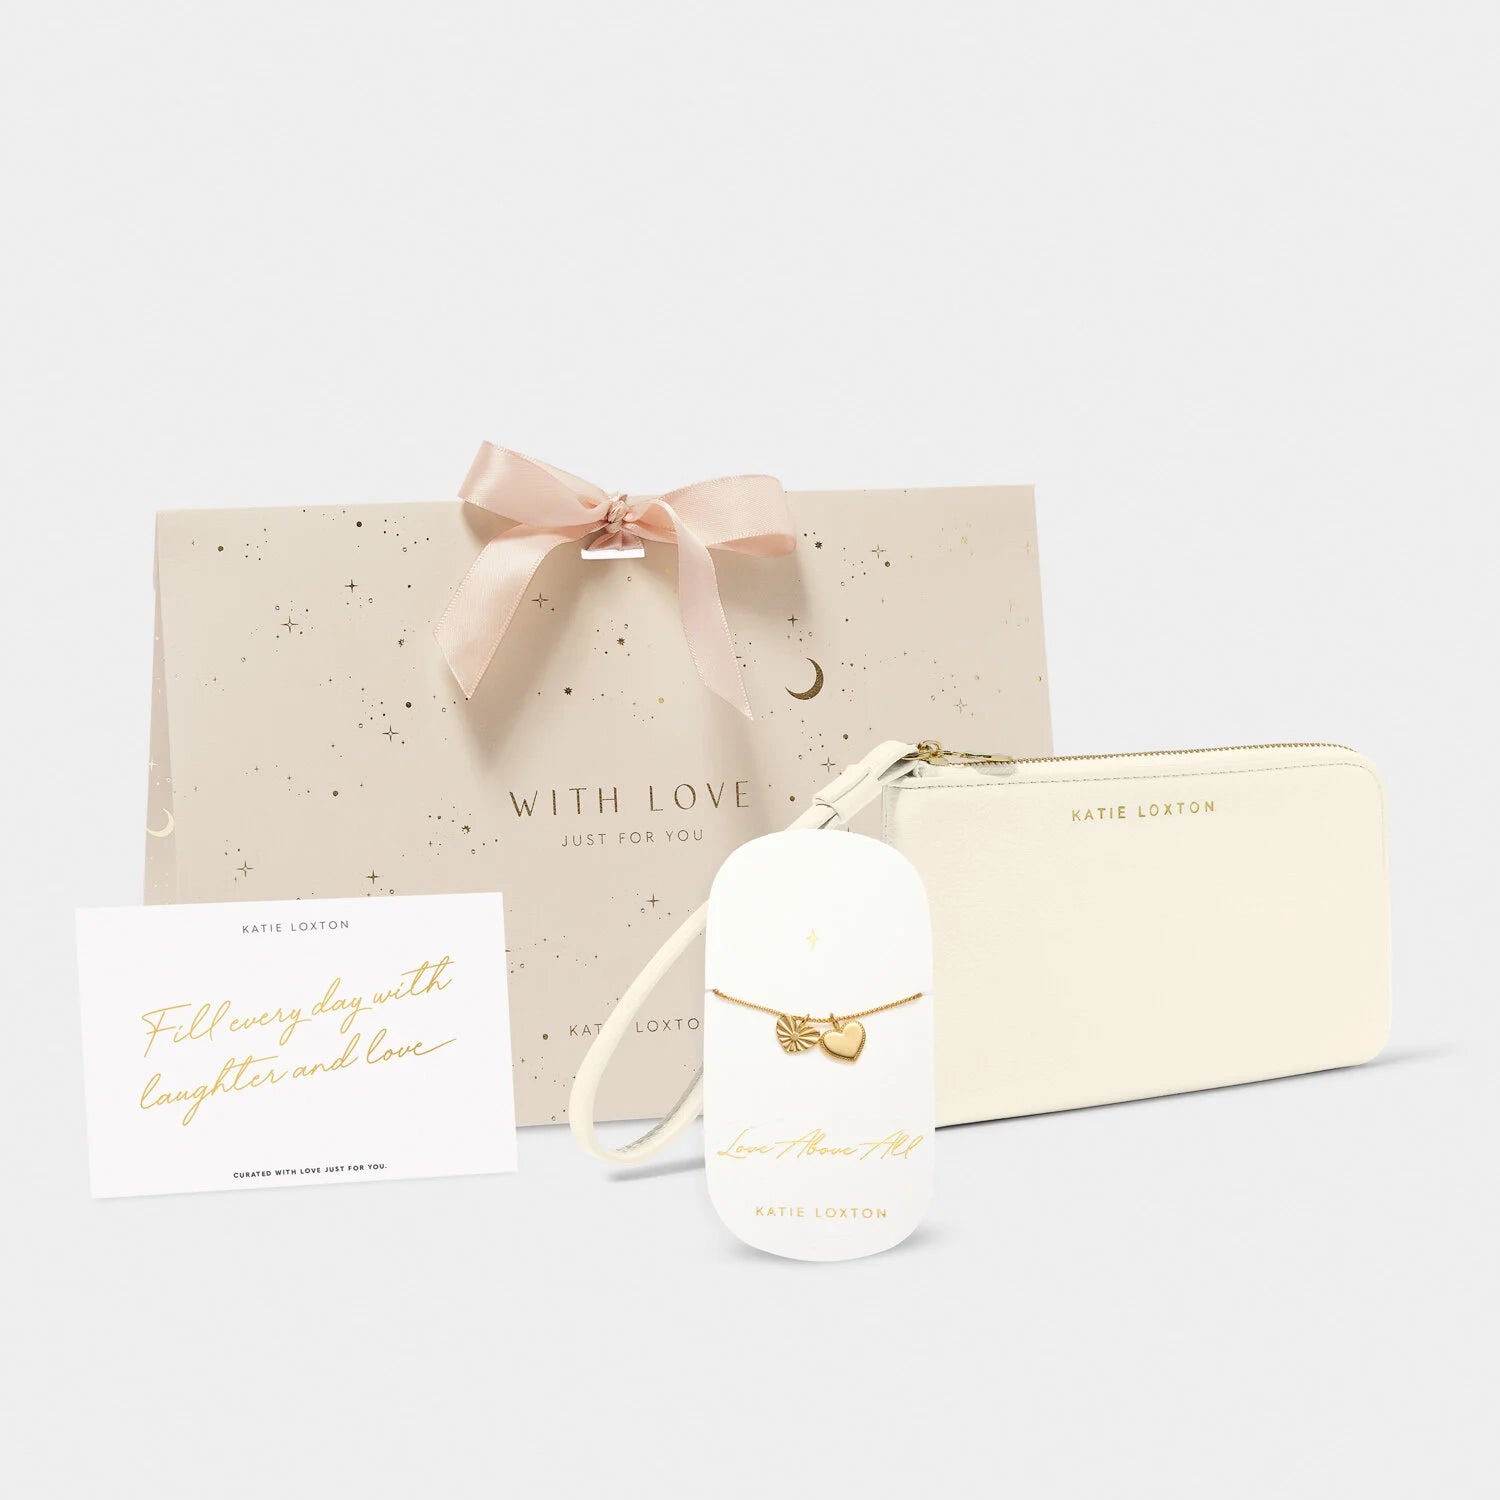 Pouch And Bracelet Gift Set - With Love - Katie Loxton